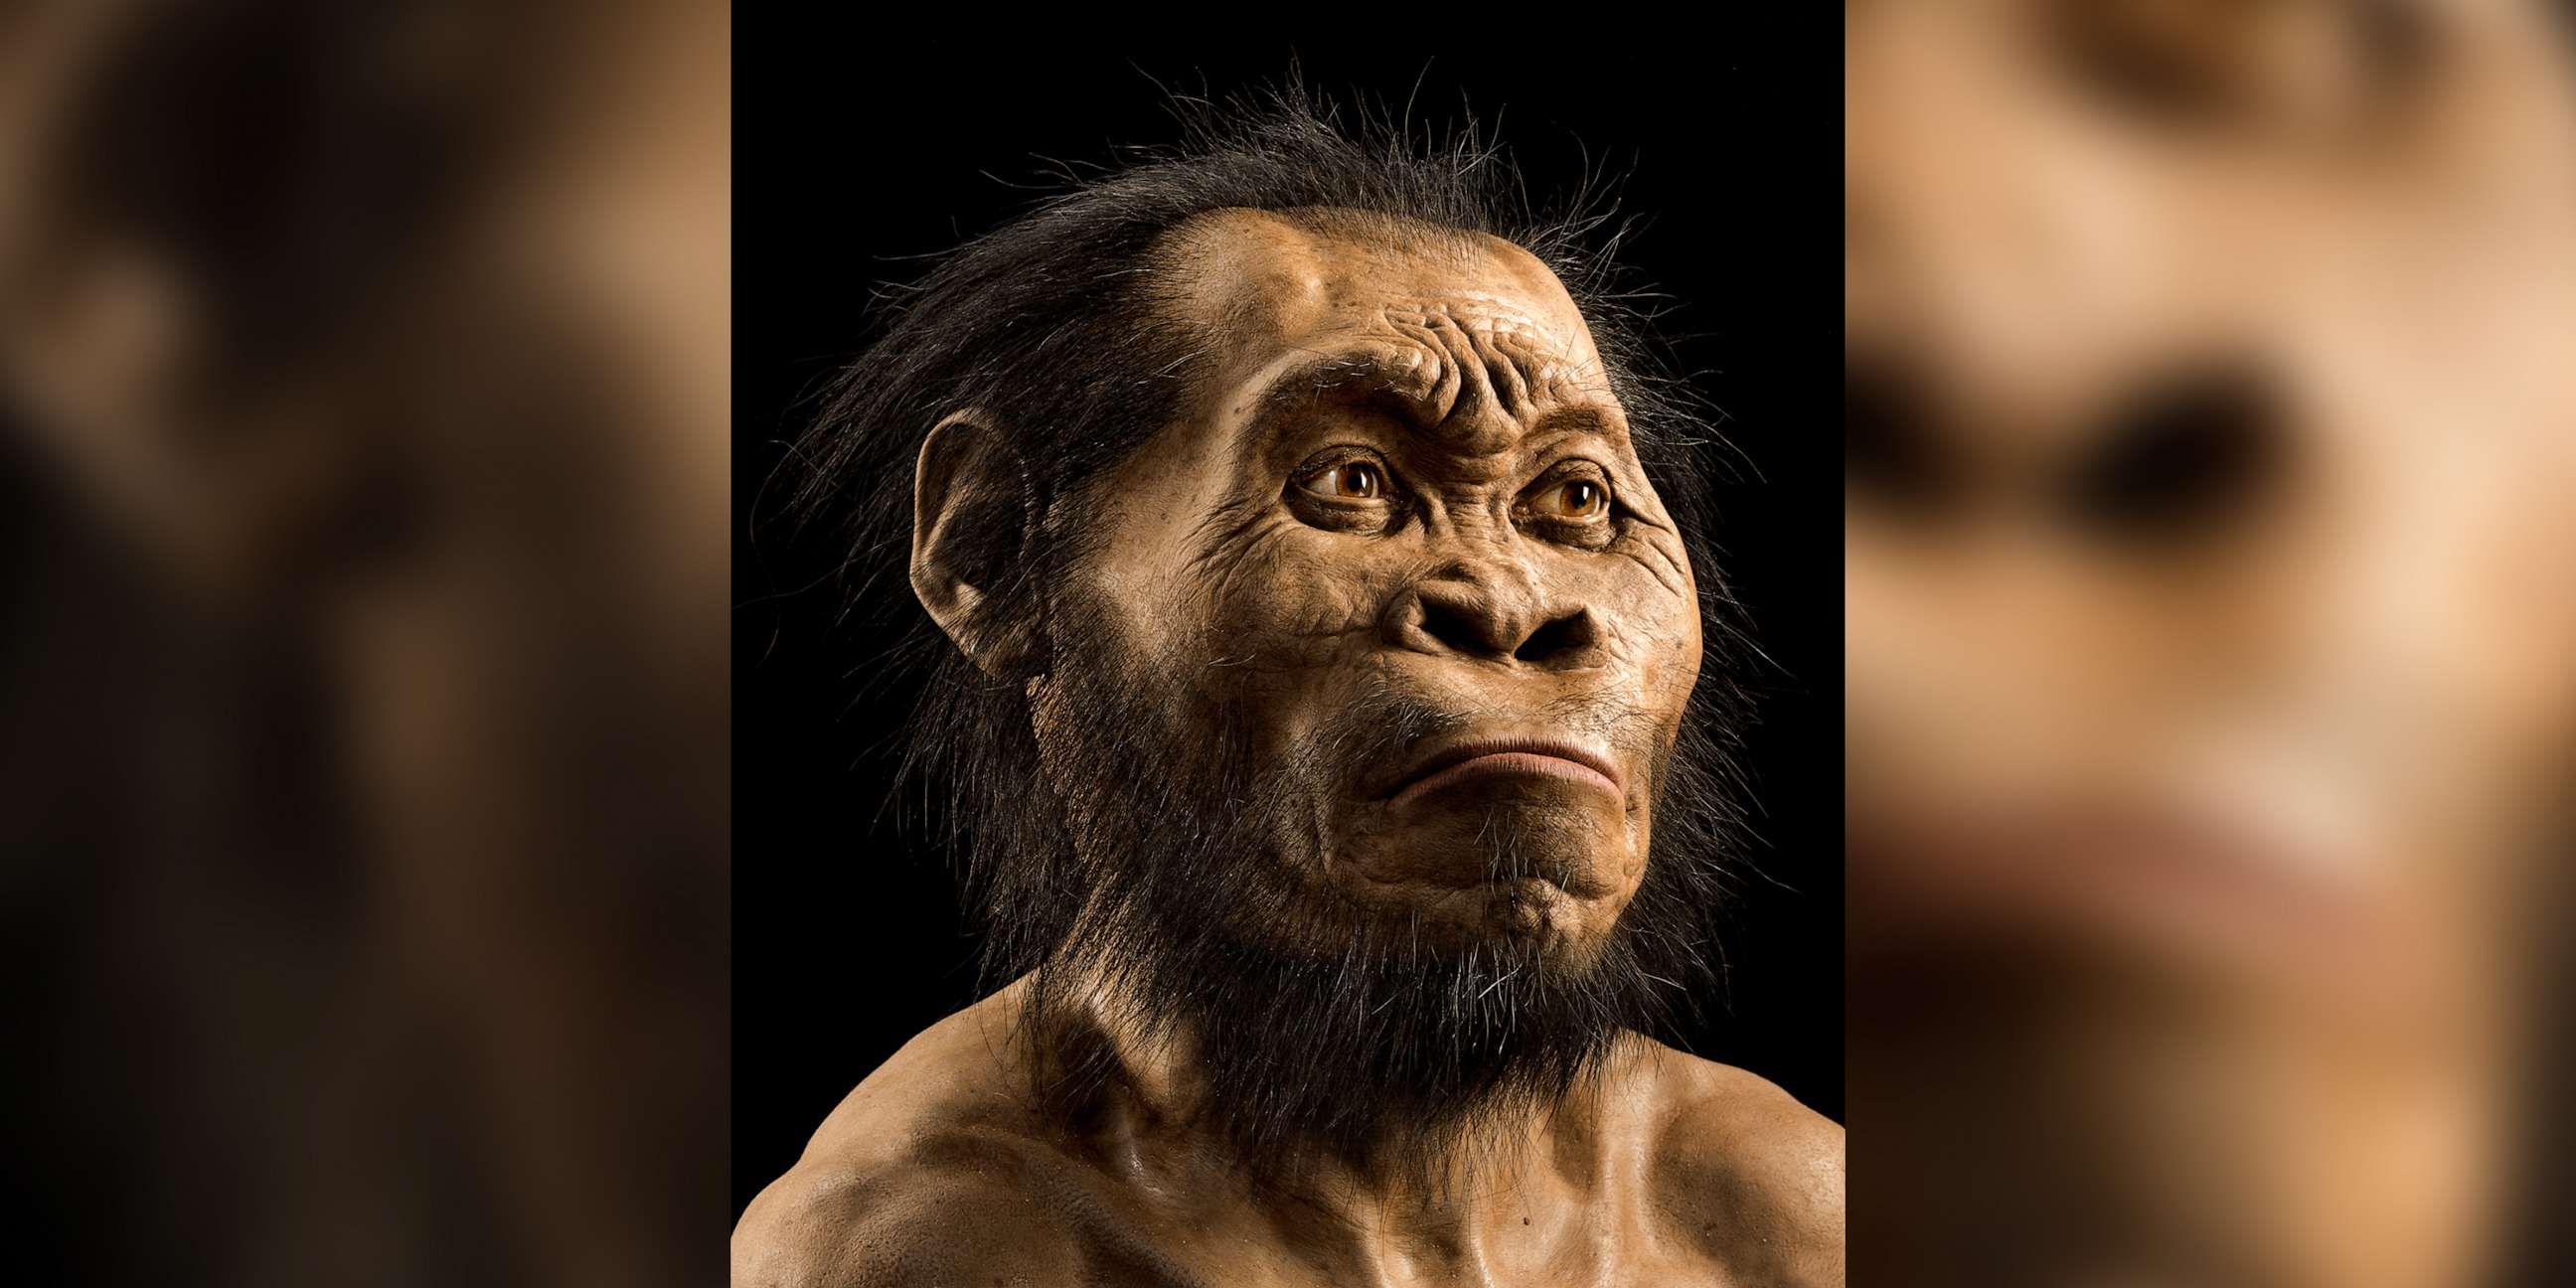 PHOTO: A rendering of Homo naledi, an early hominin discovered in 2013 that likely lived between 335,000 to 236,000 years ago.